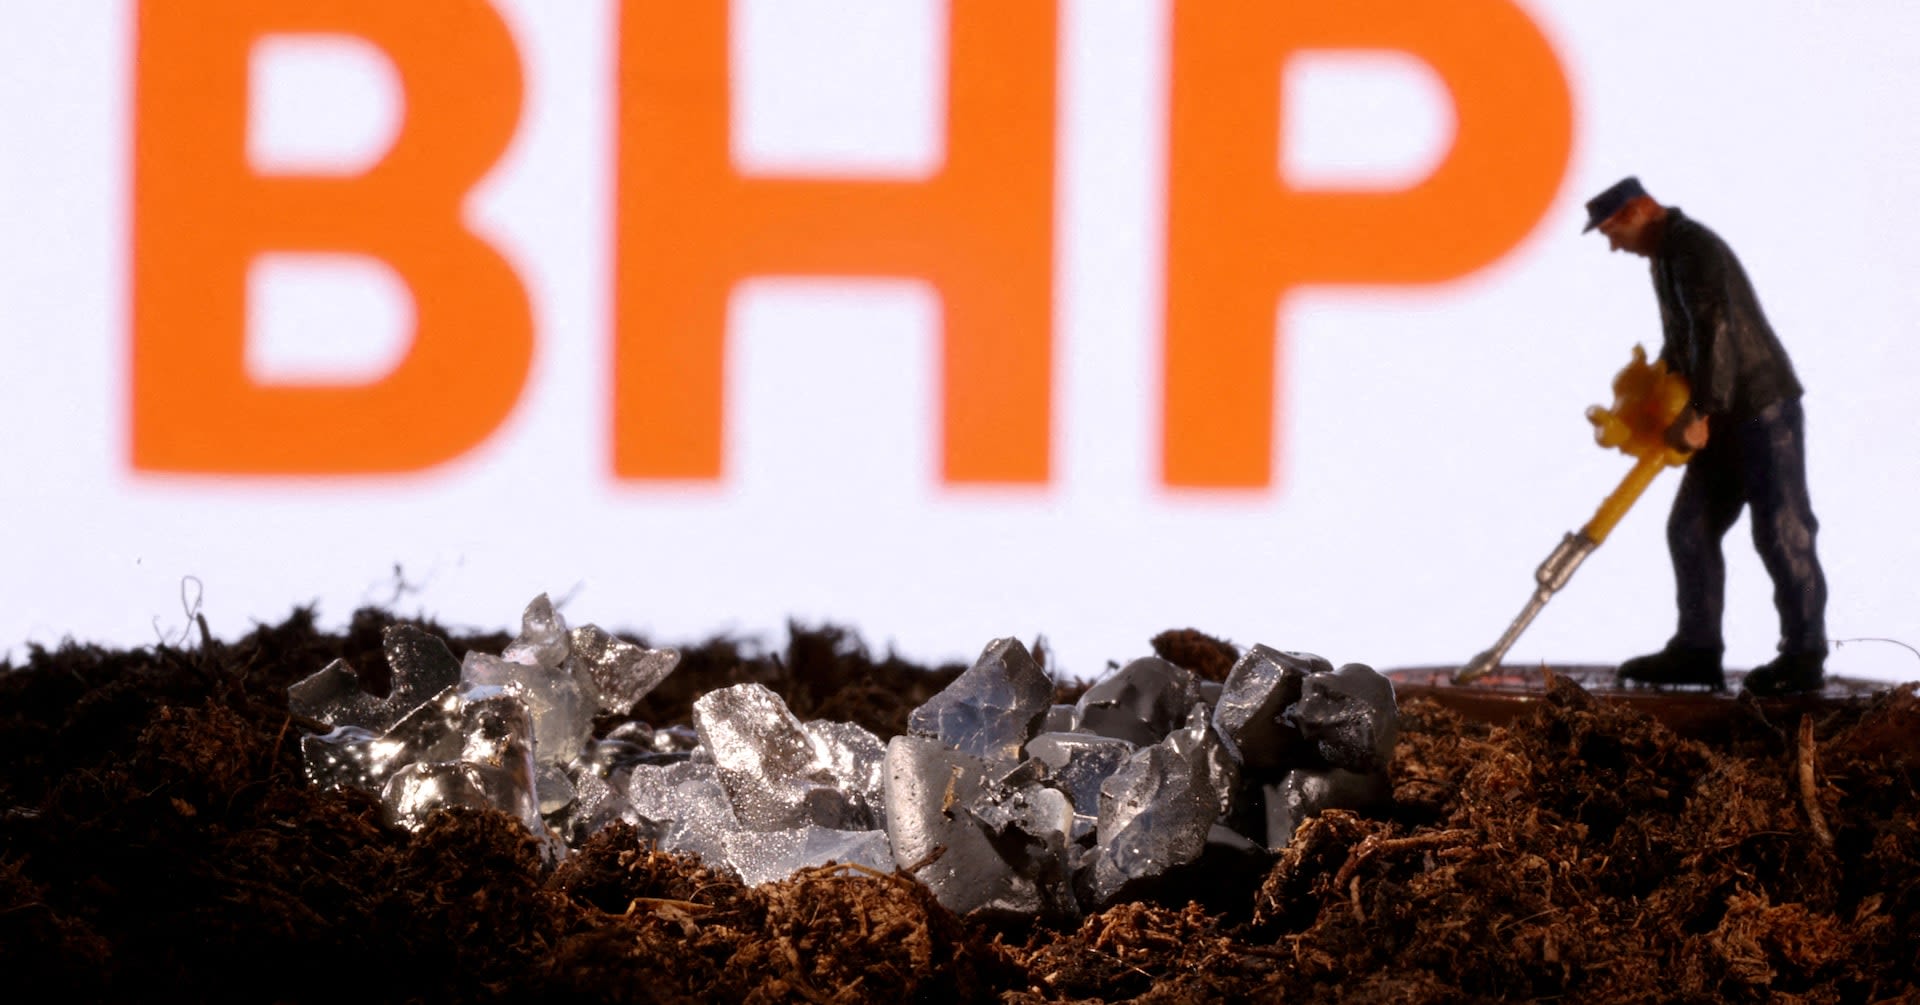 Investors relieved BHP walked from $49 bln Anglo takeover deal